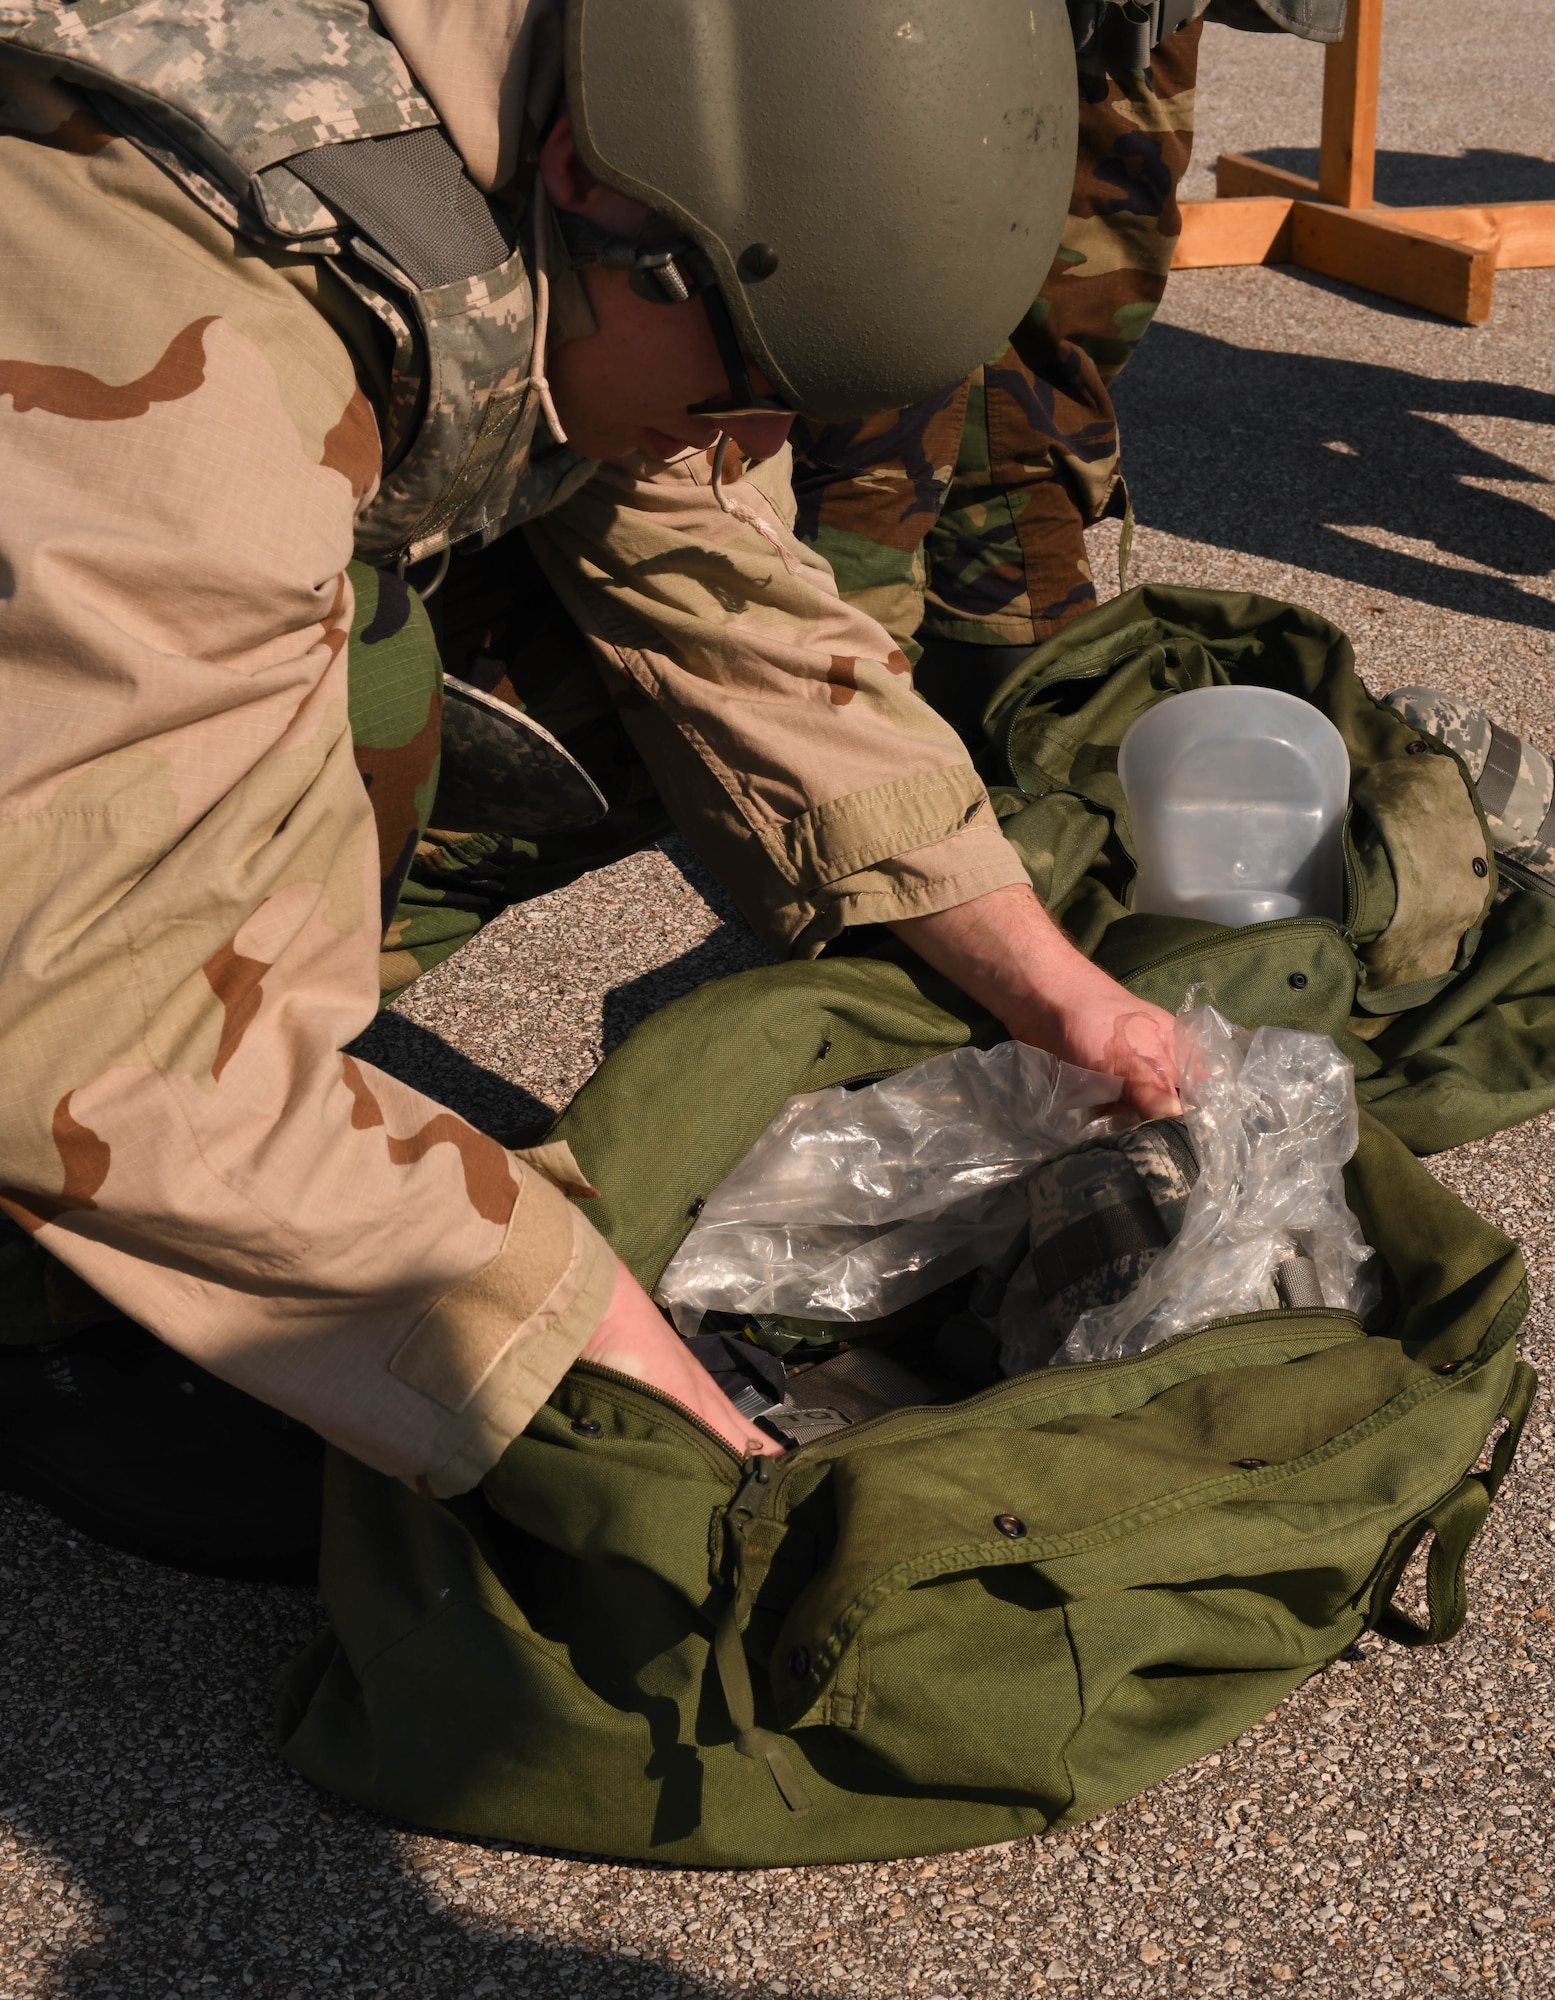 U.S. Air Force Airmen don MOPP gear during a CBRN exercise at Whiteman Air Force Base, Missouri, September, 15, 2022. MOPP gear is protective equipment worn in CBRN-contaminated environments meant to protect an individual from CBRN agents. Utilizing MOPP gear ensures Airmen are ready to respond and defend its personnel and assets. (U.S. Air Force photo by Airman 1st Class Hailey Farrell)